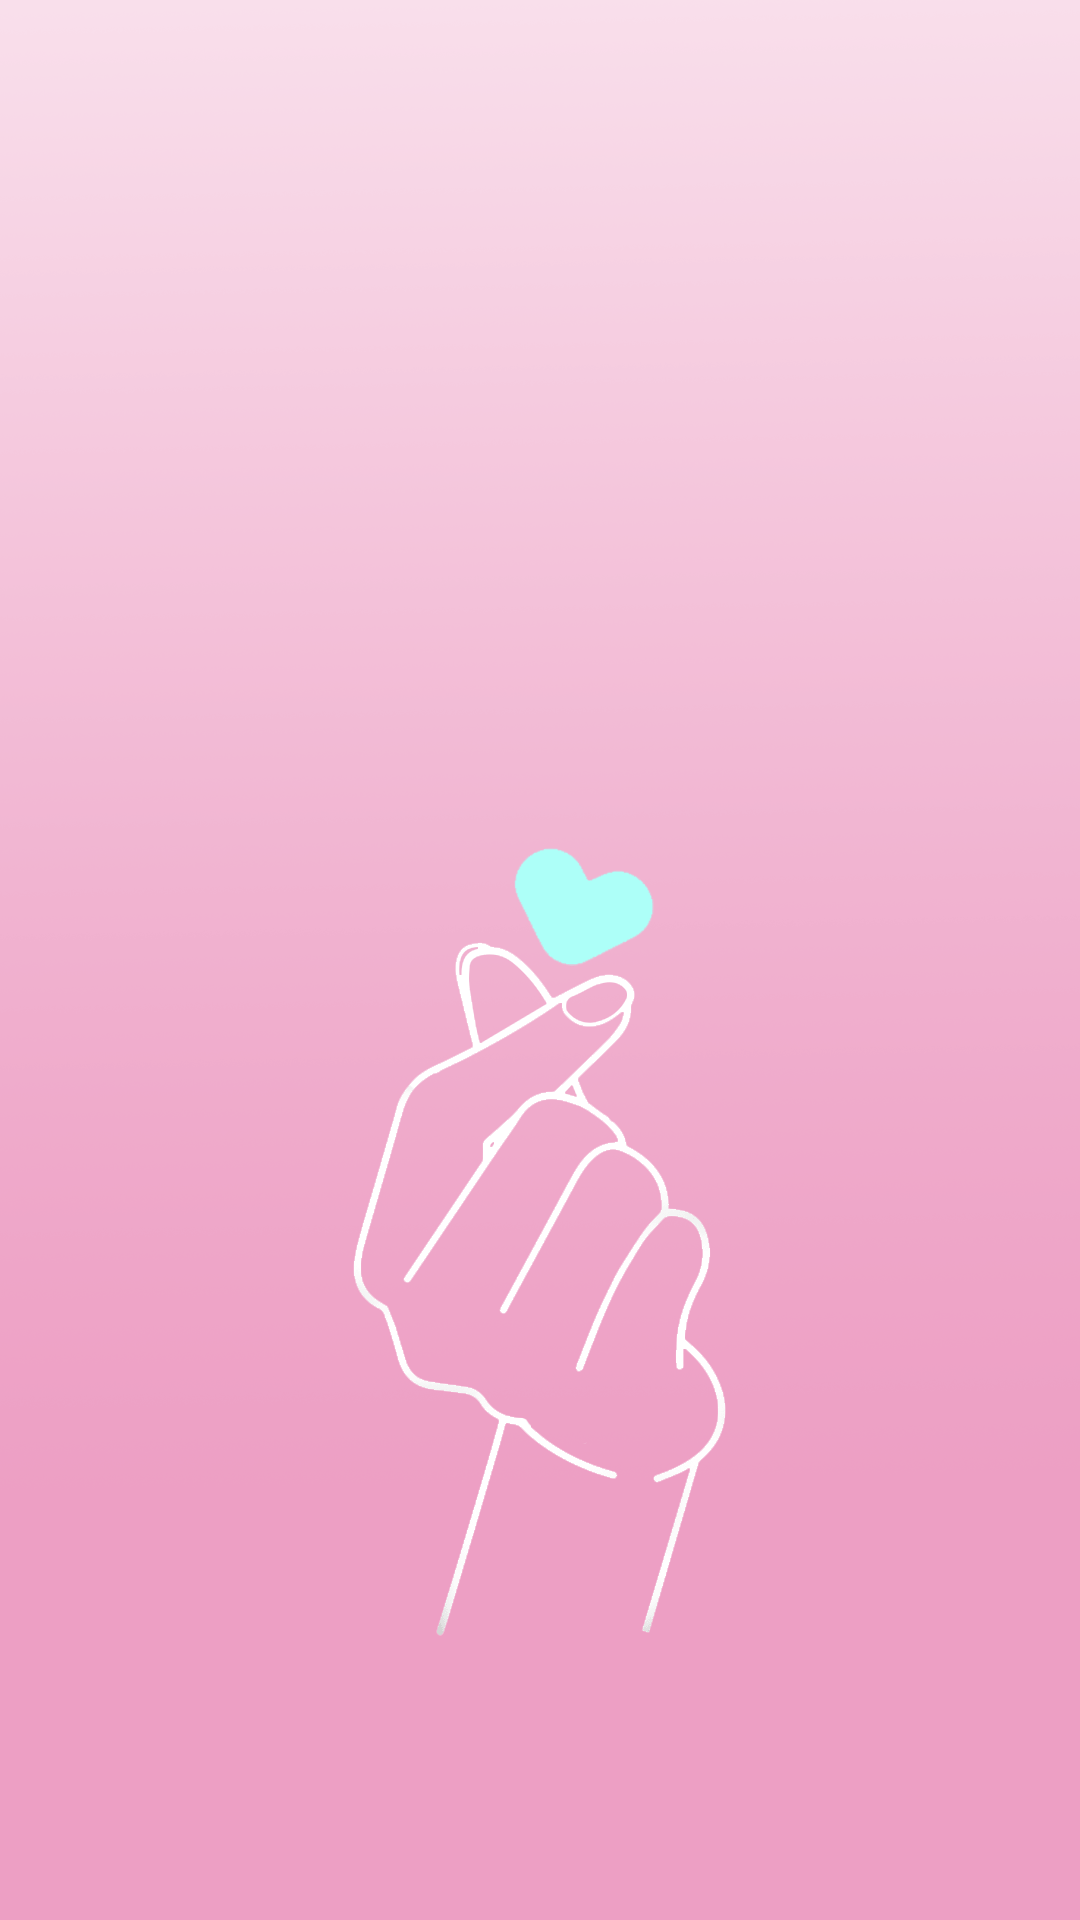 A pink background with a white outline of a hand holding a blue heart. - Pink heart